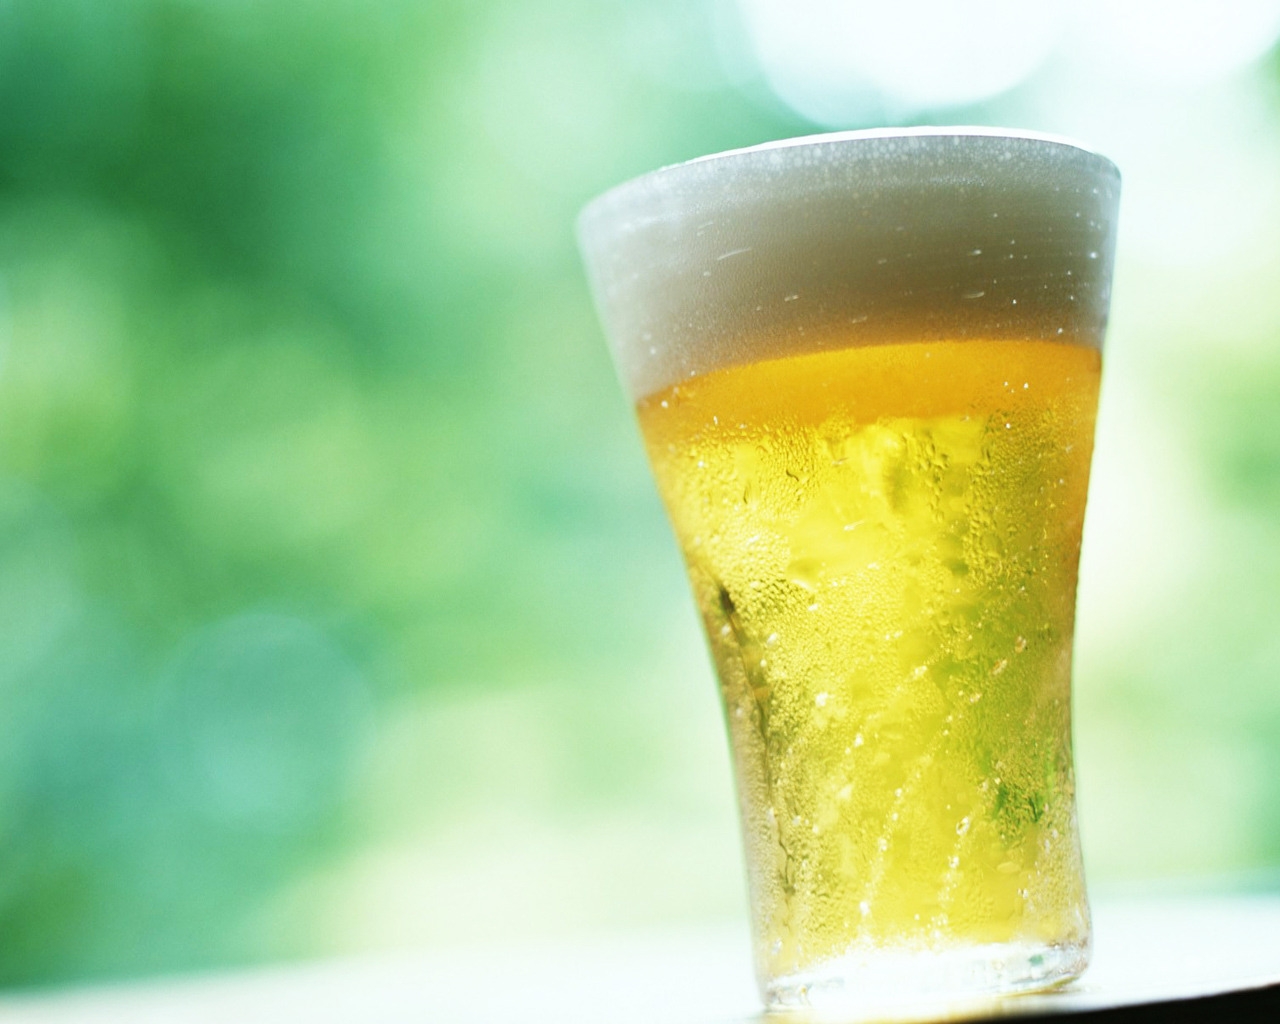 Cold Glass of Beer hd wallpaper for 1280 x 1024 resolution